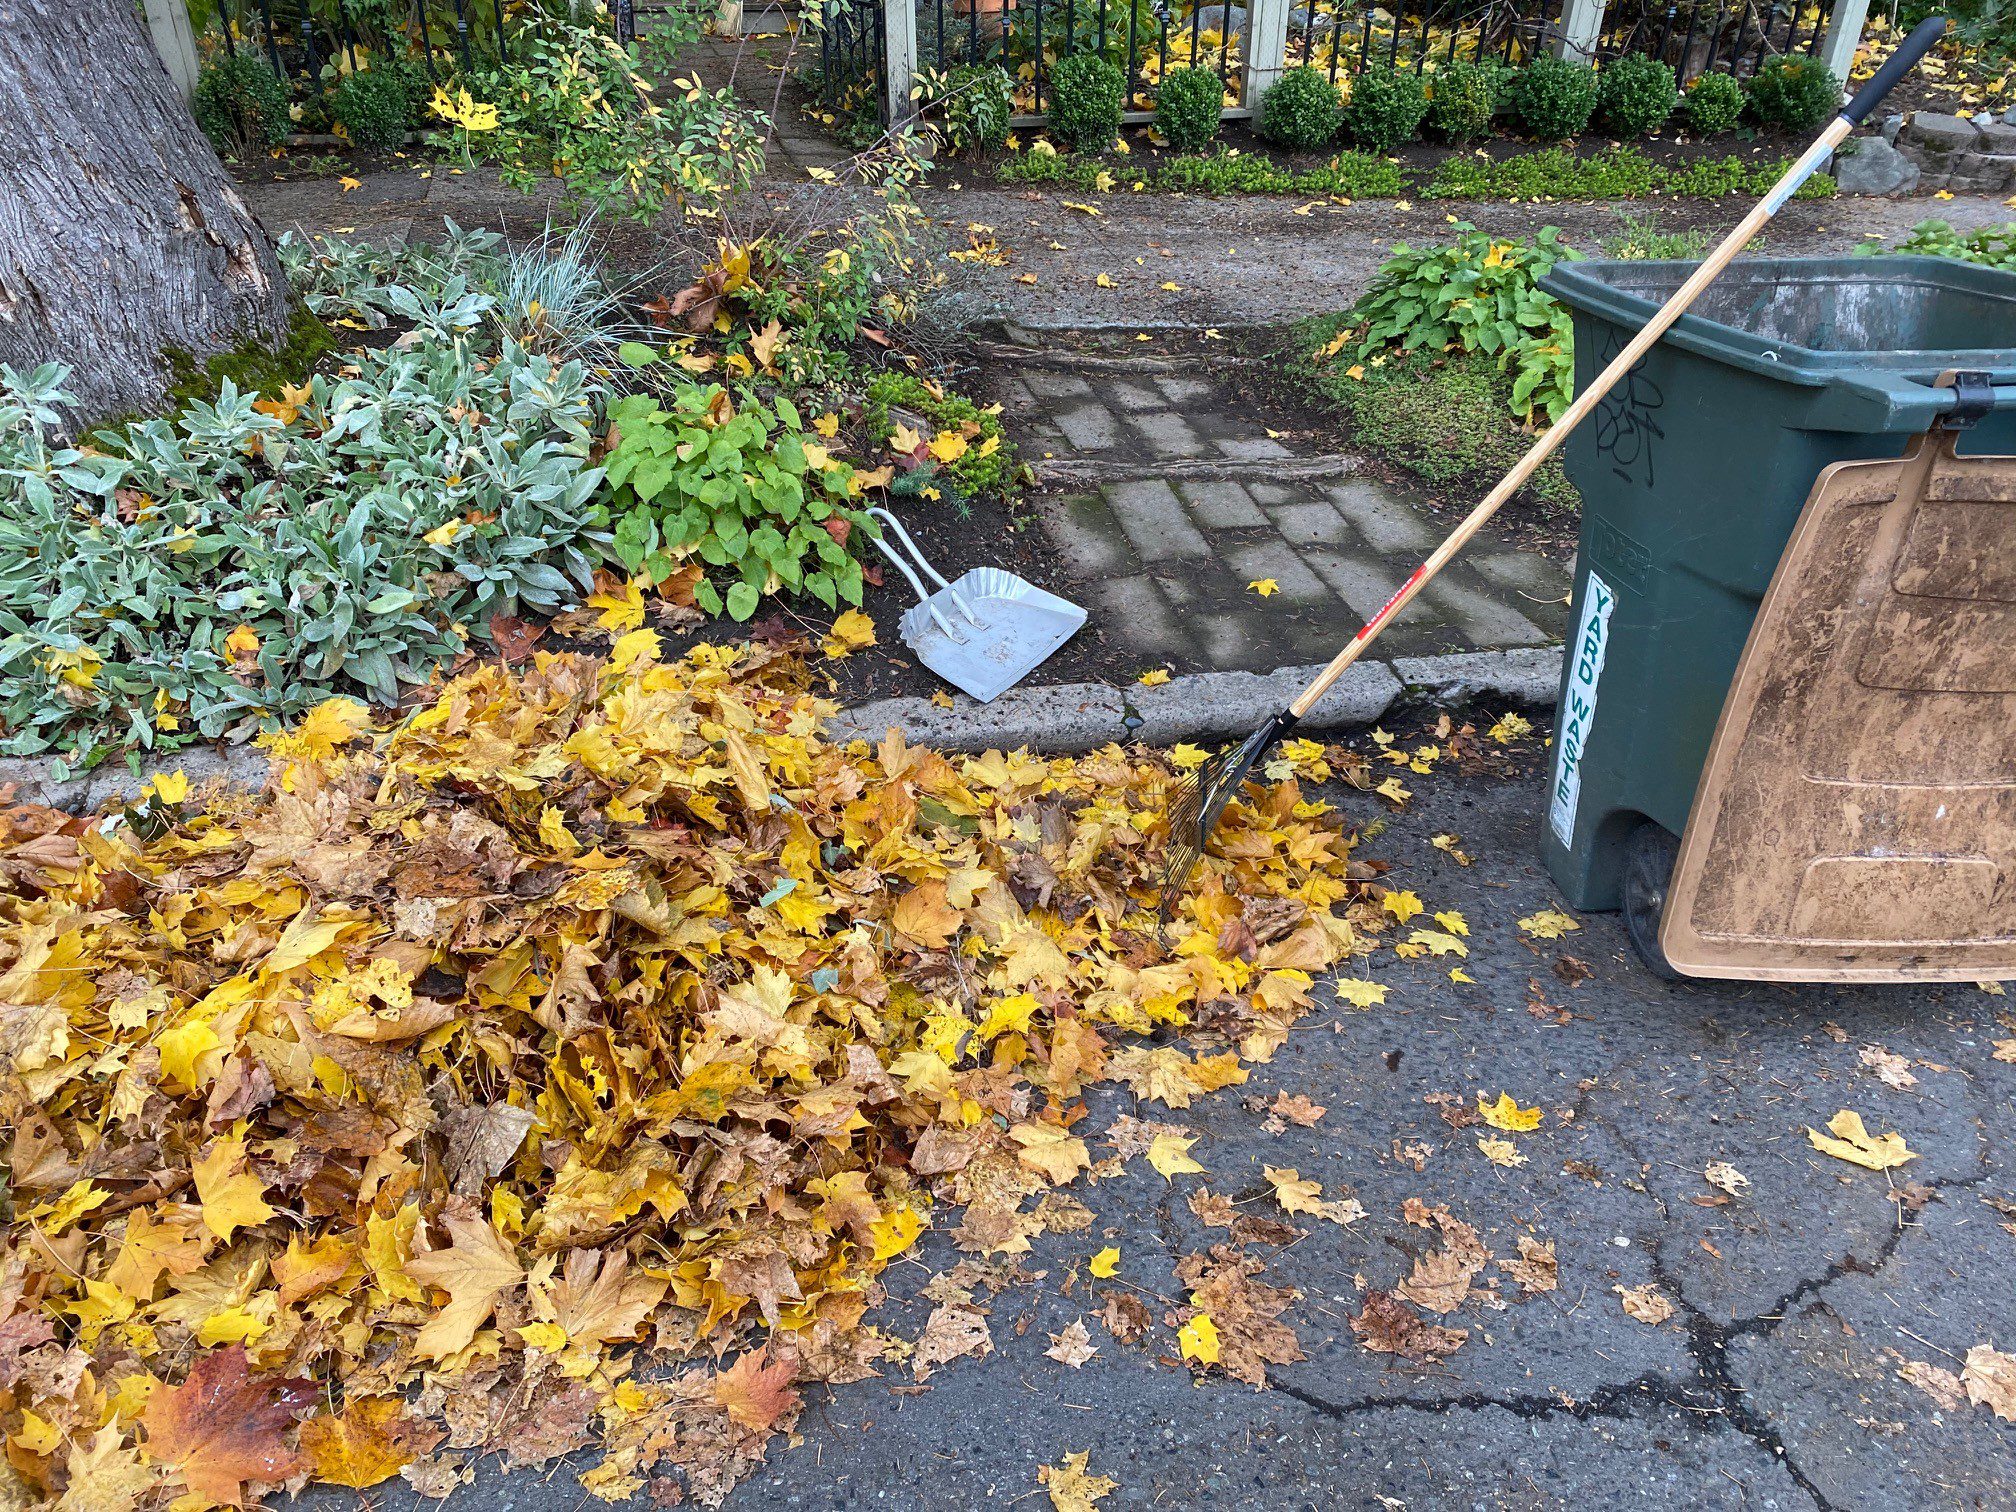 A large pile of leaves next to the curb and sidewalk. A rake and green yard waste bin are on the right side of the photo.